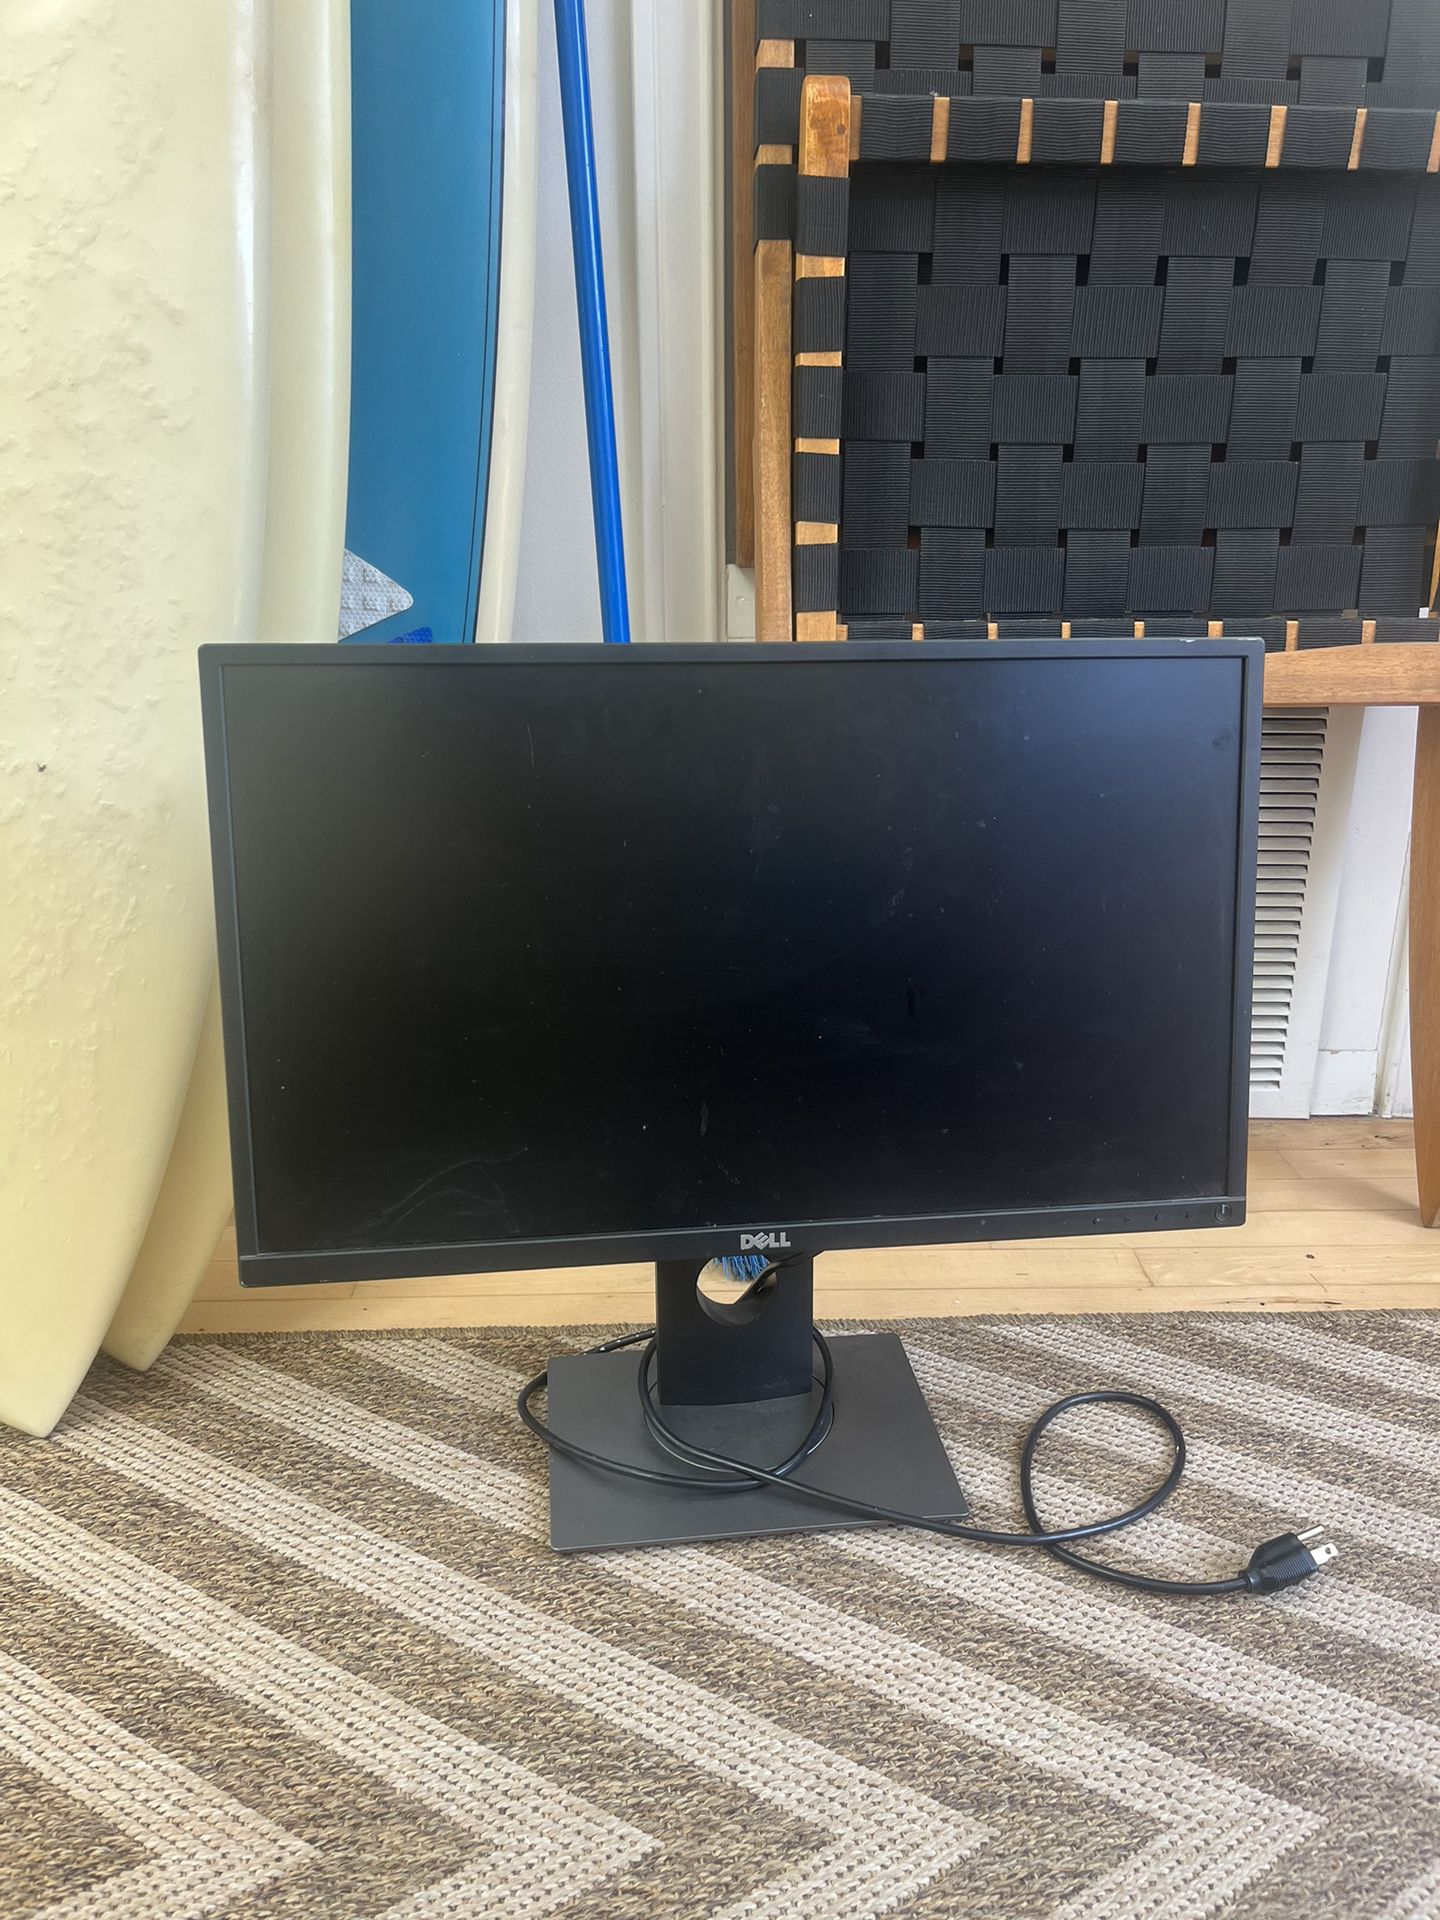 One (1) Dell Monitor